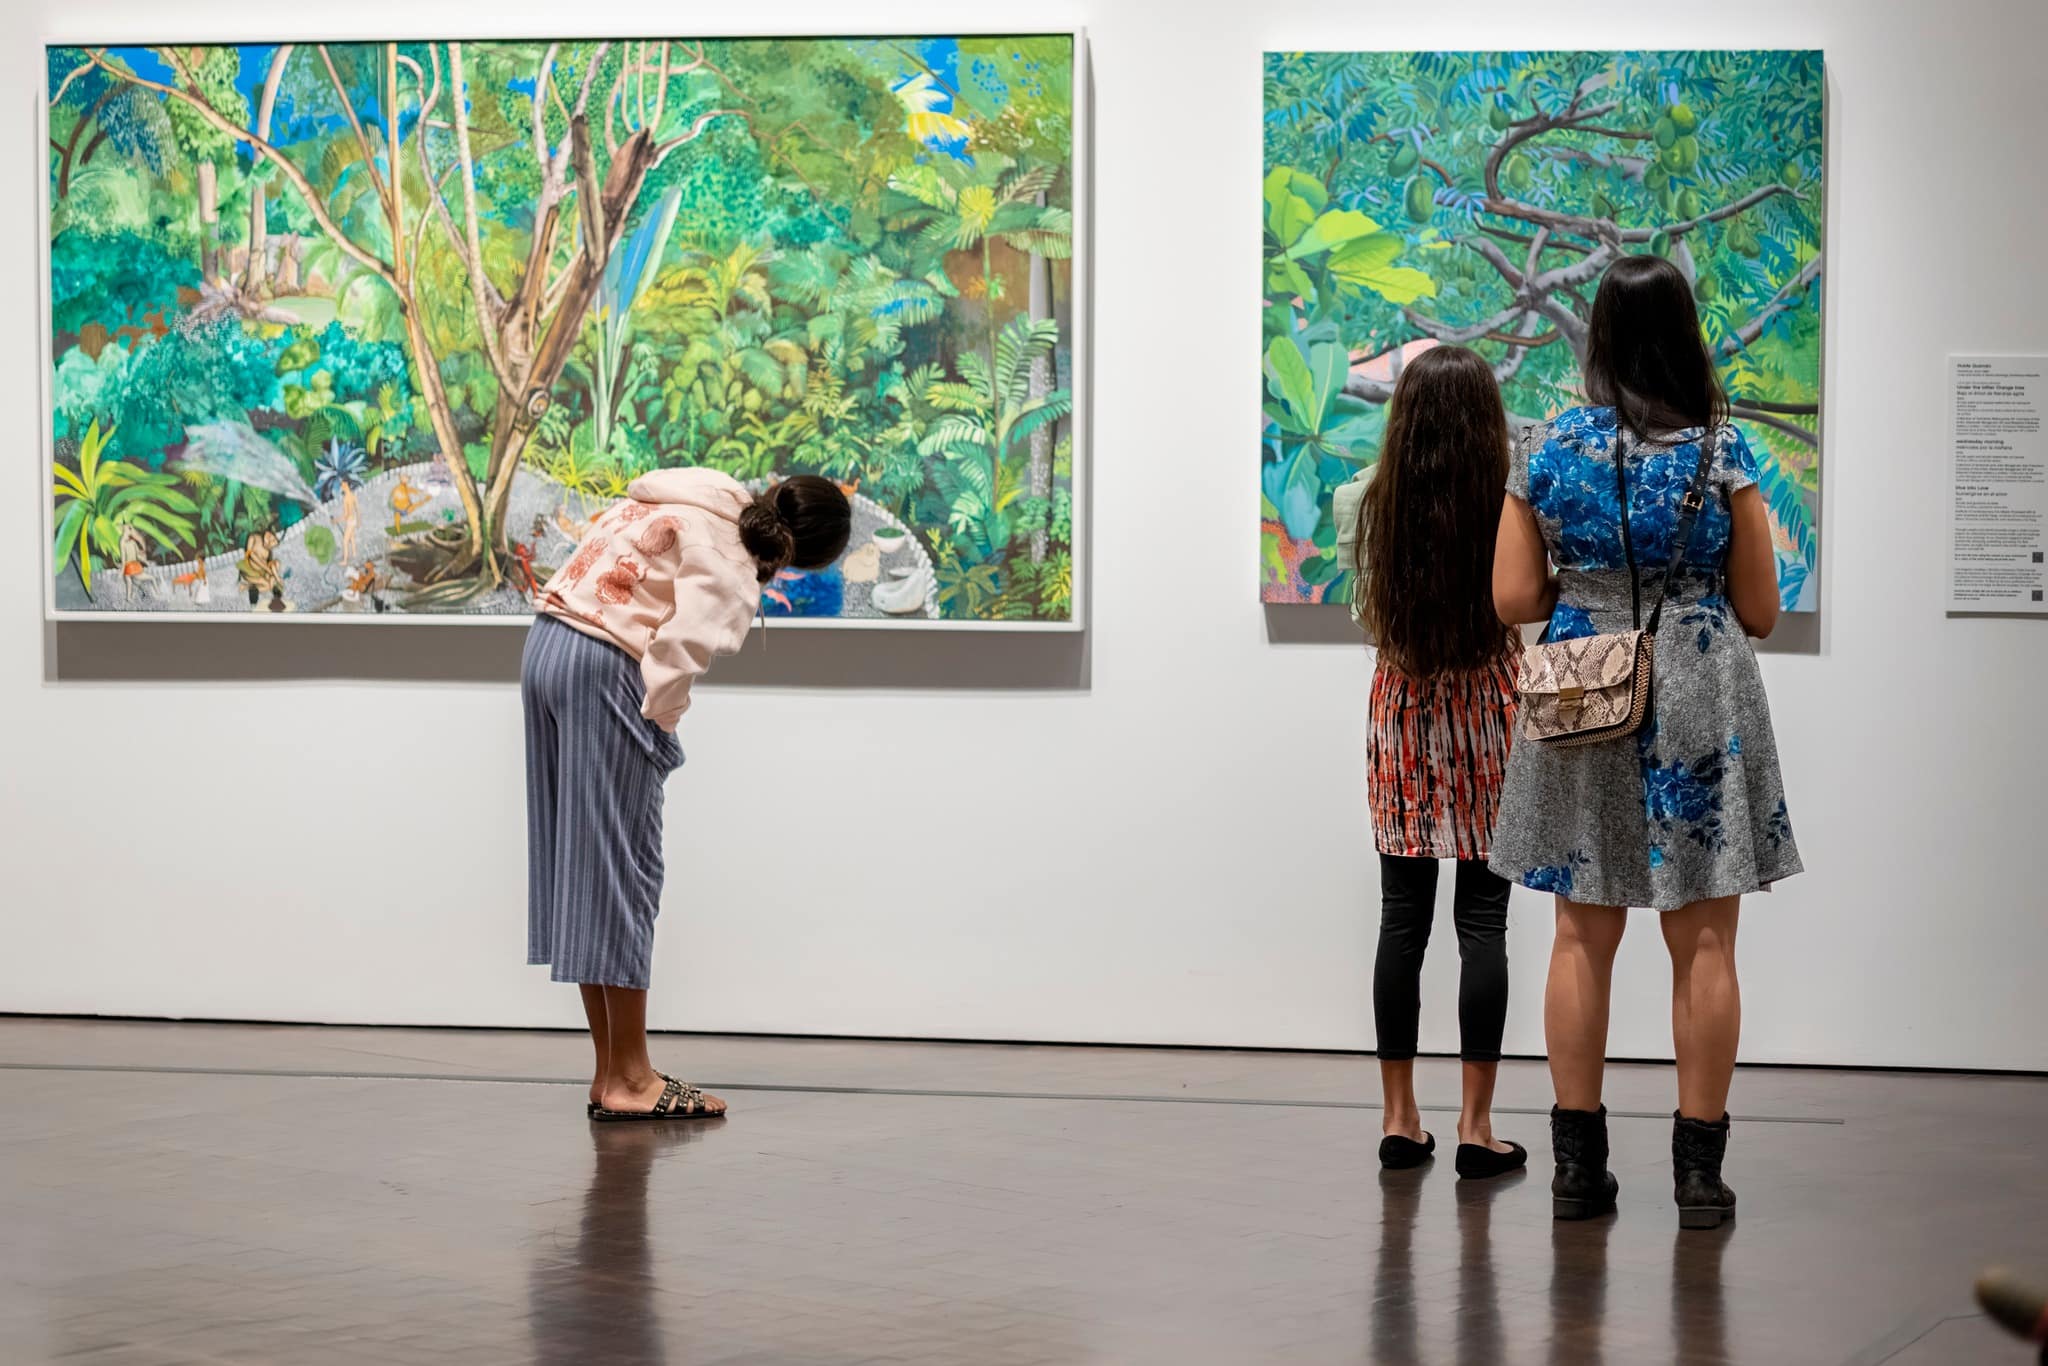 Three people standing in front of nature-inspired artwork at a museum